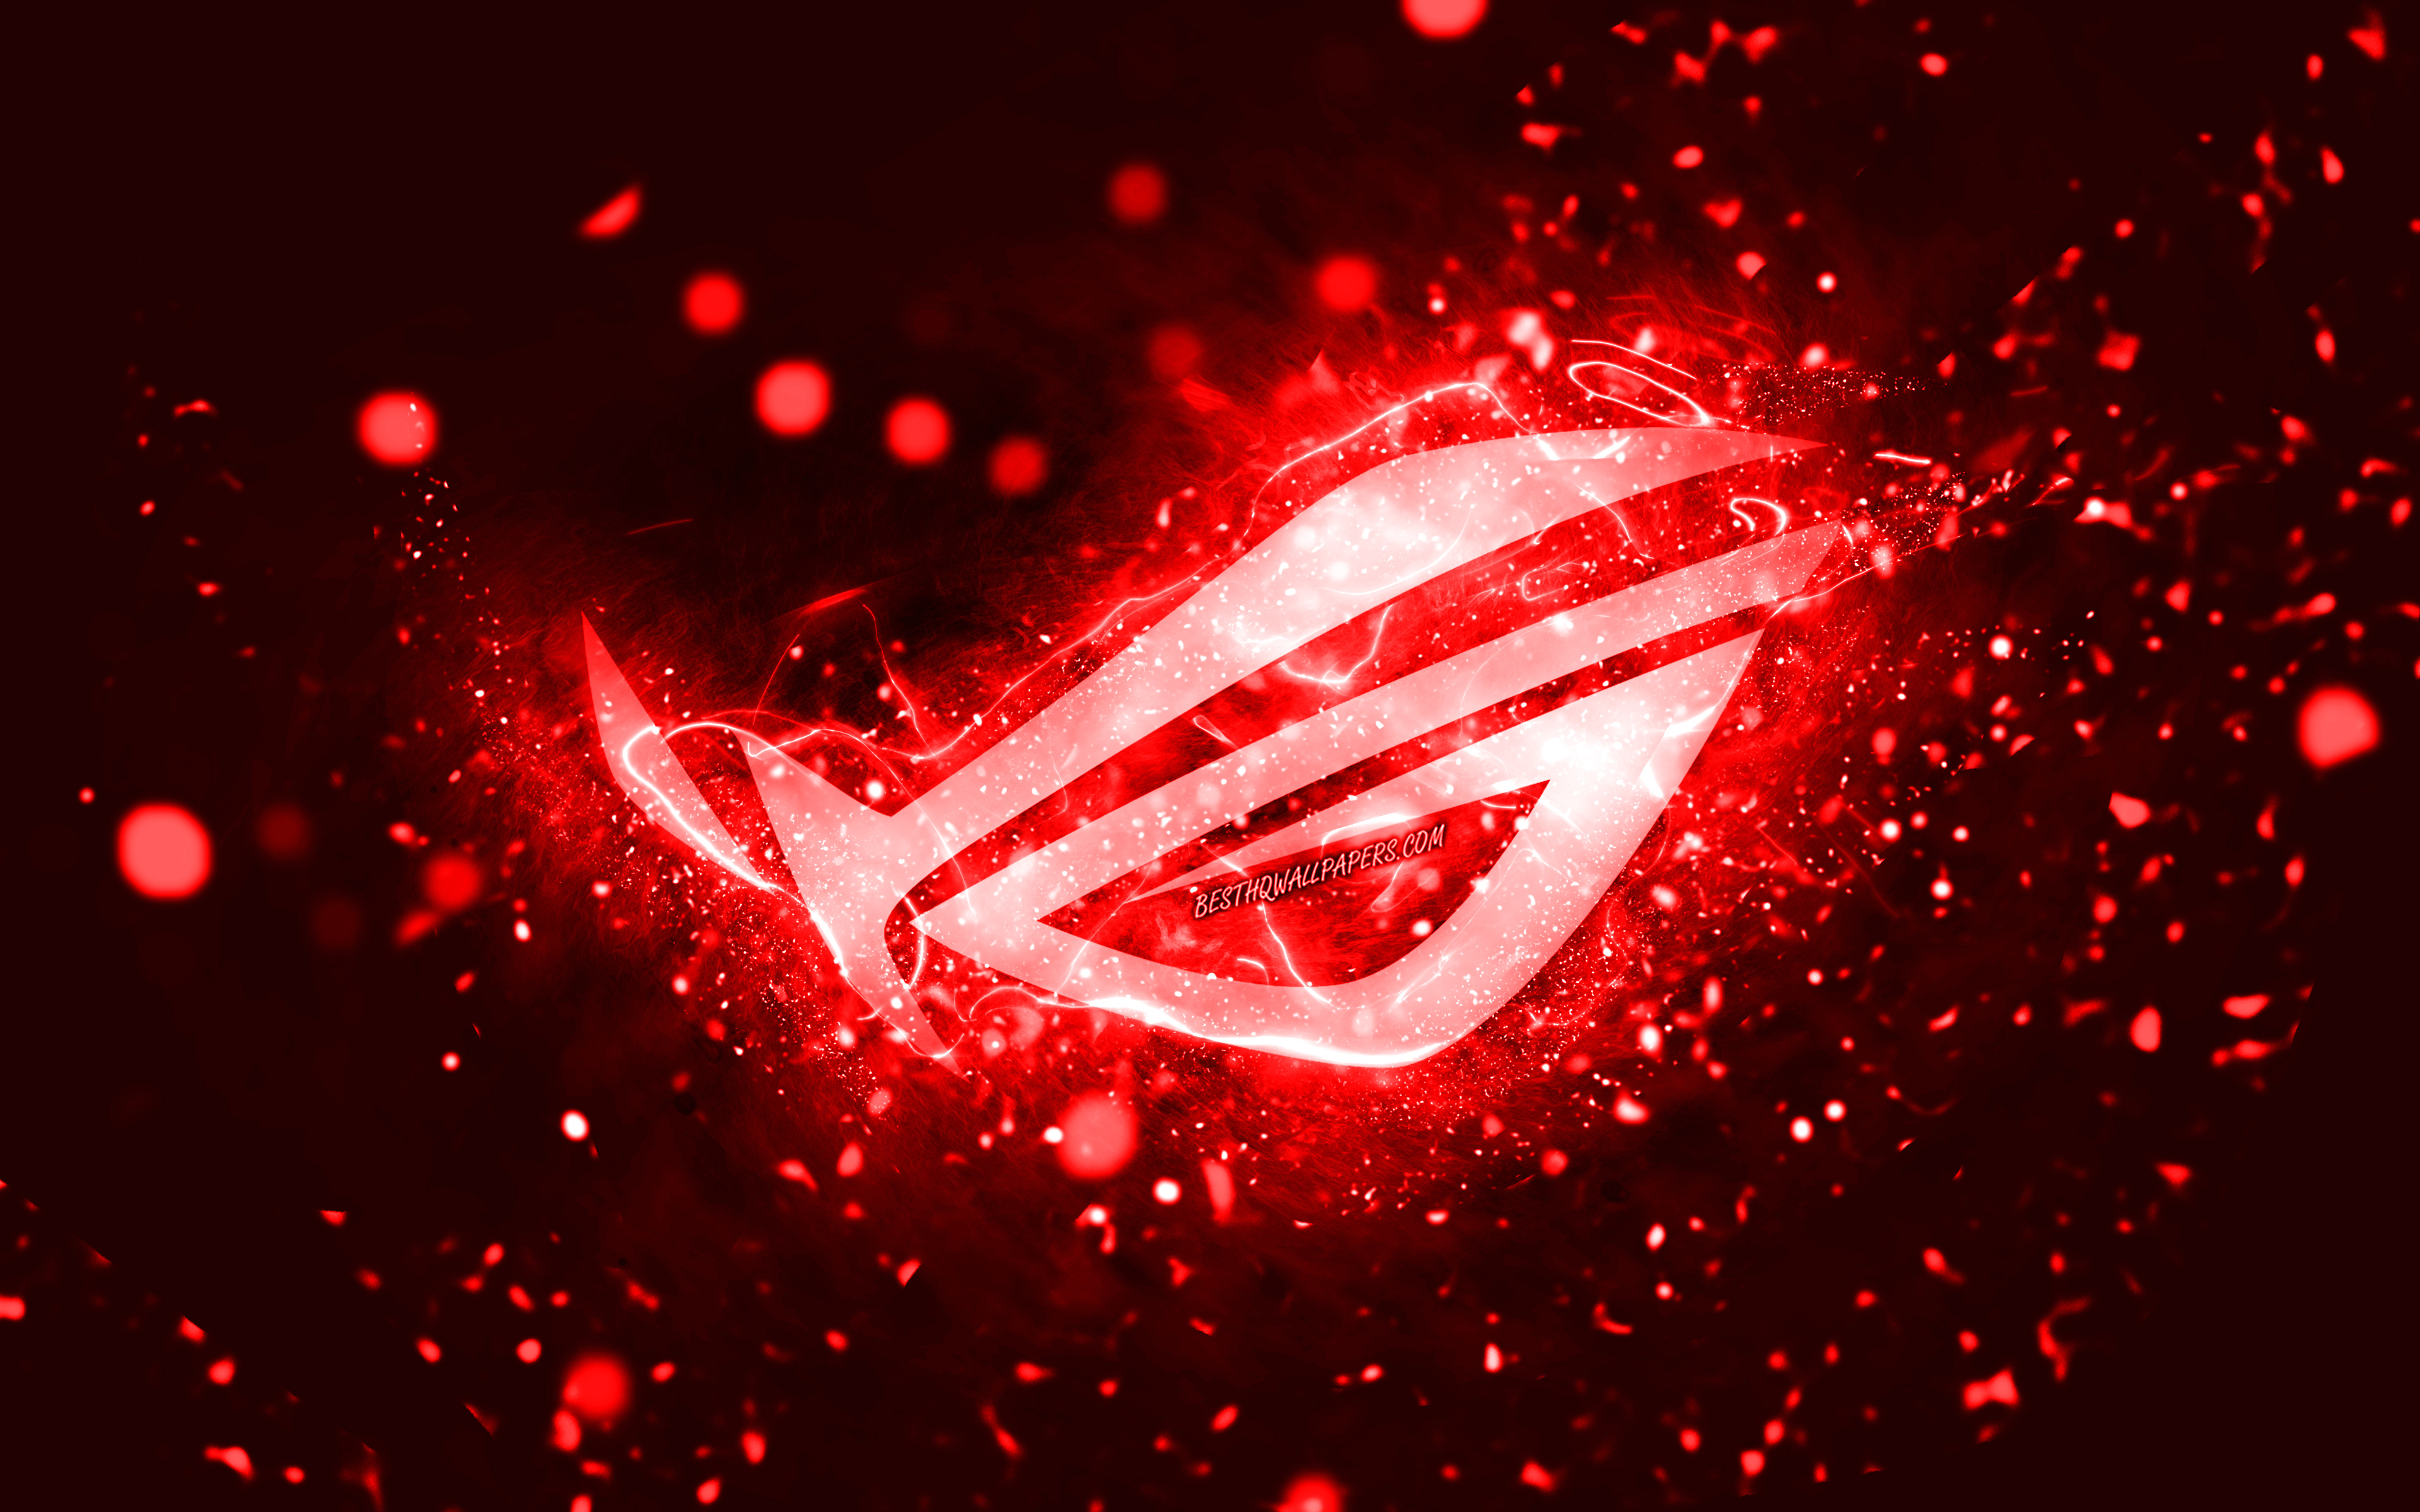 Download wallpapers Rog red logo, 4k, red neon lights, Republic Of Gamers,  creative, red abstract background, Rog logo, Republic Of Gamers logo, Rog  for desktop with resolution 3840x2400. High Quality HD pictures